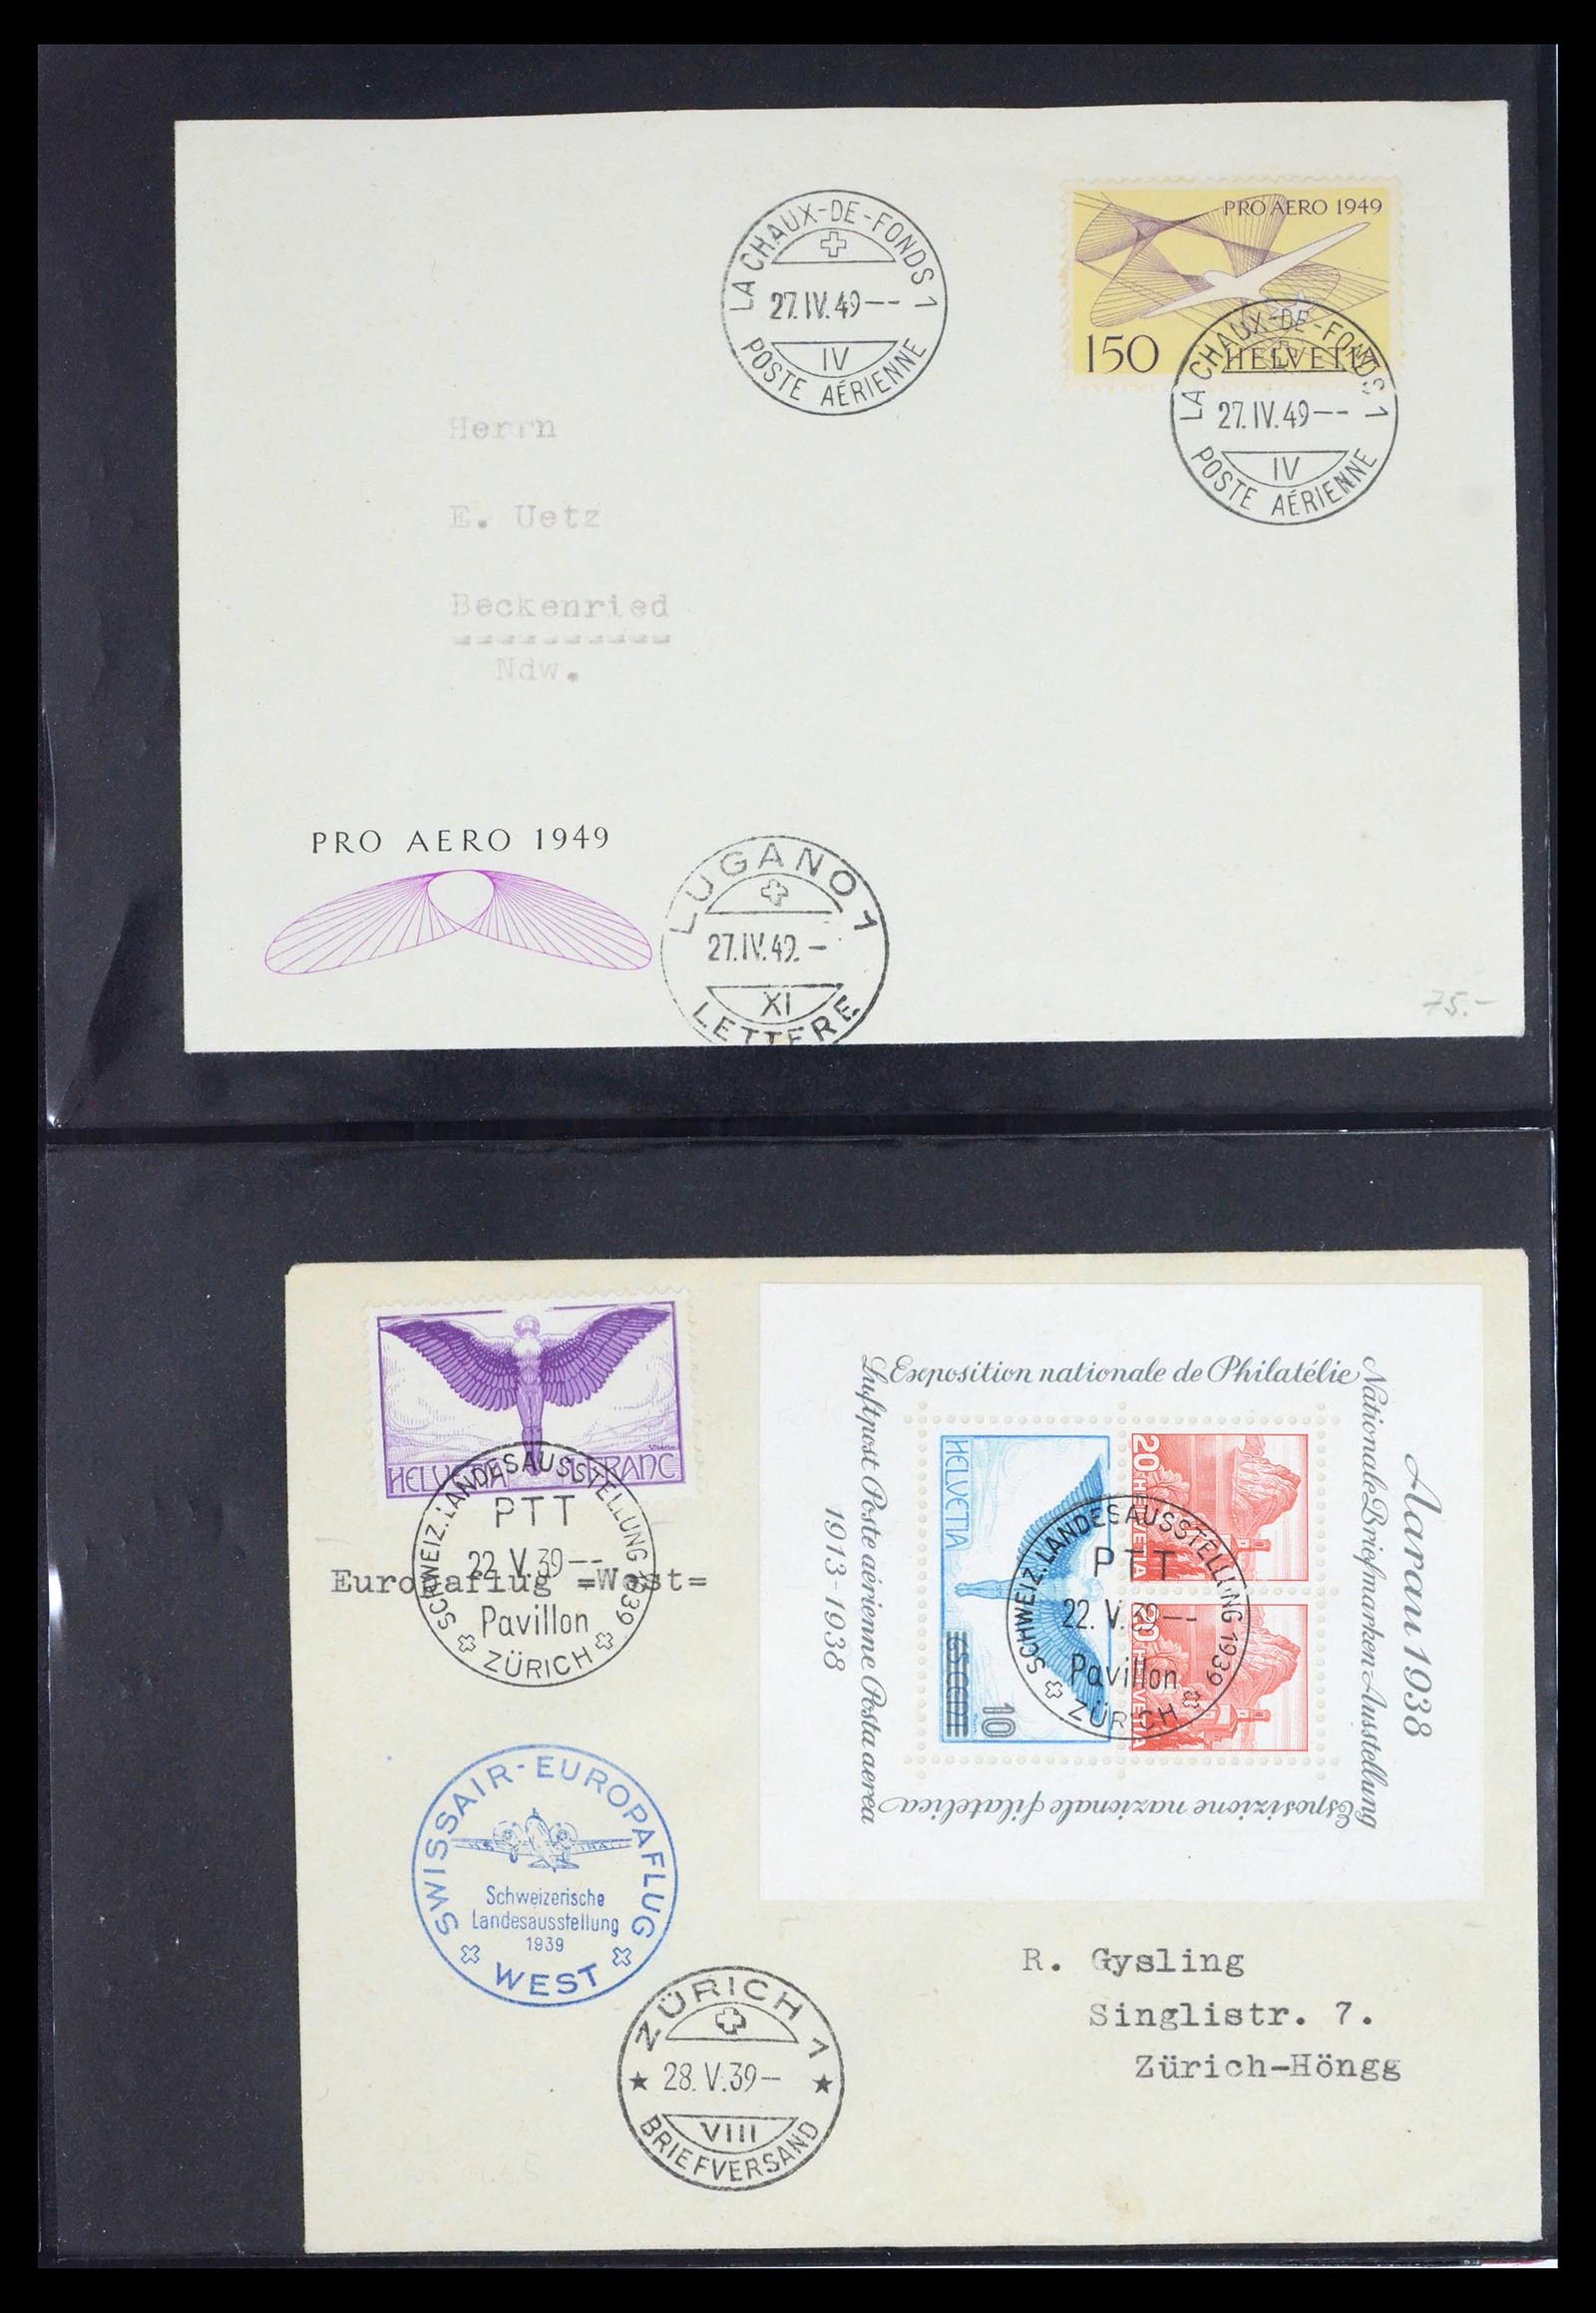 39533 0017 - Stamp collection 39533 Zwitserland airmail covers 1925-1960.